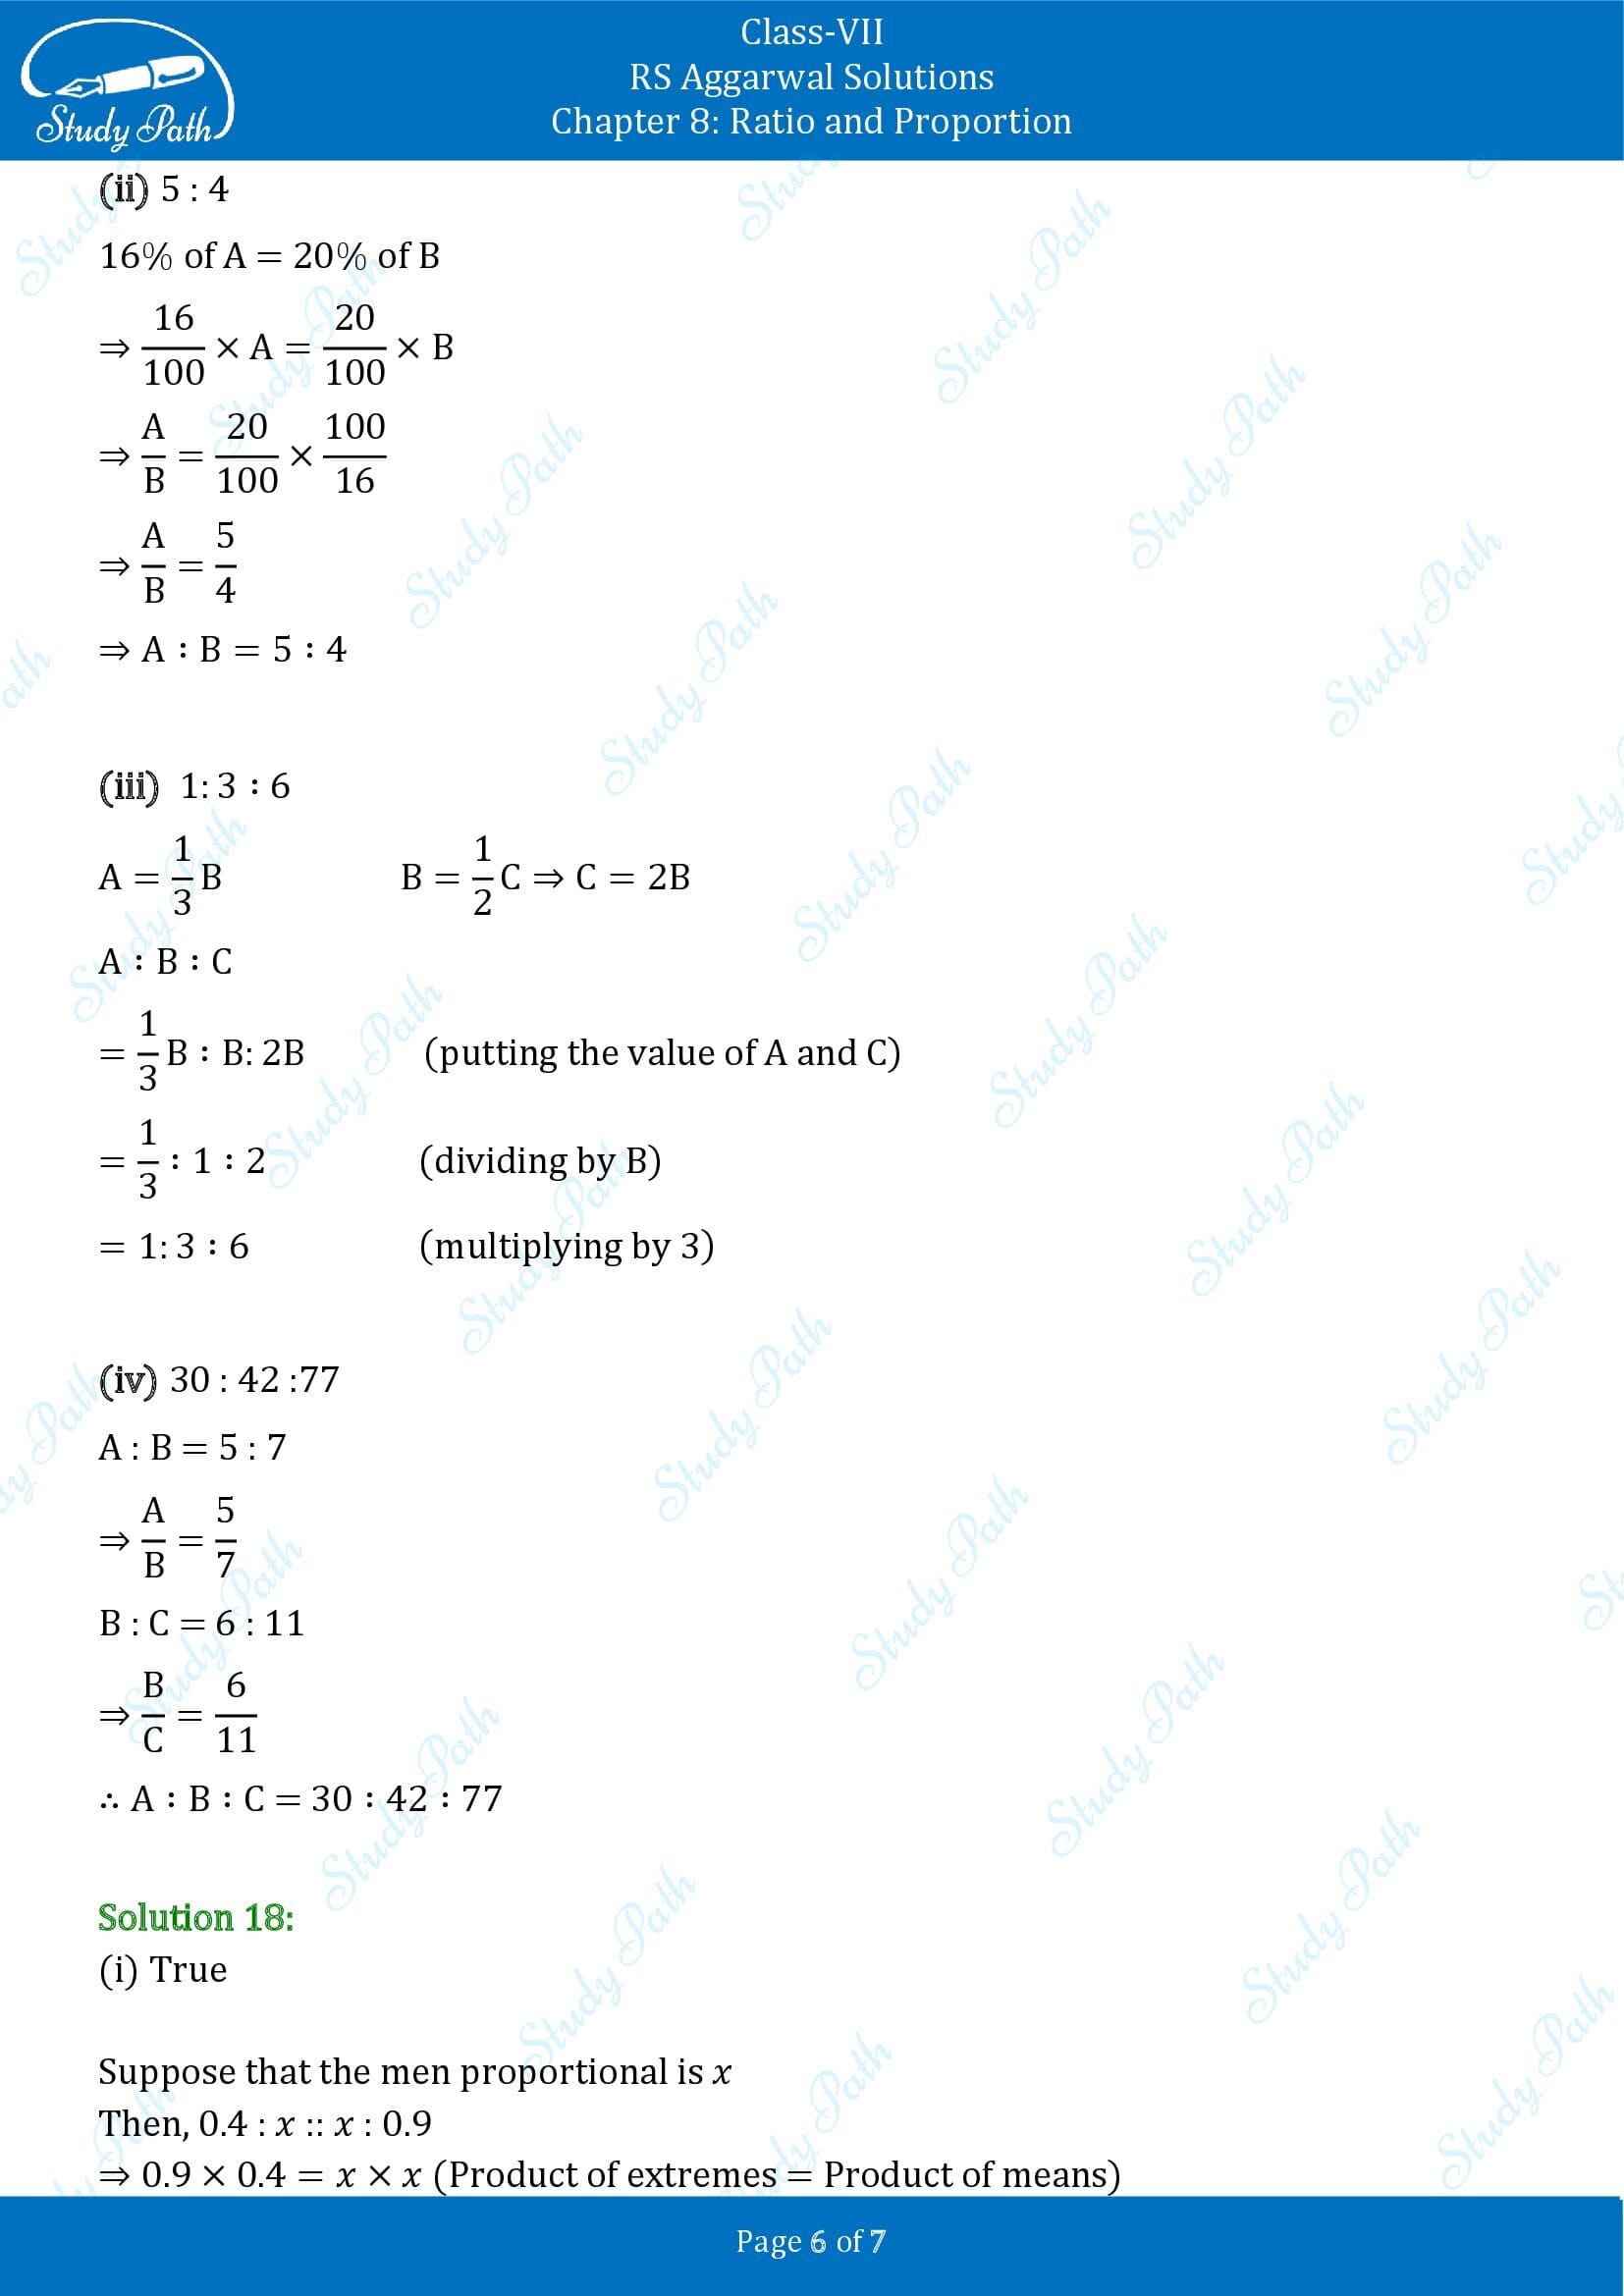 RS Aggarwal Solutions Class 7 Chapter 8 Ratio and Proportion Test Paper 00006